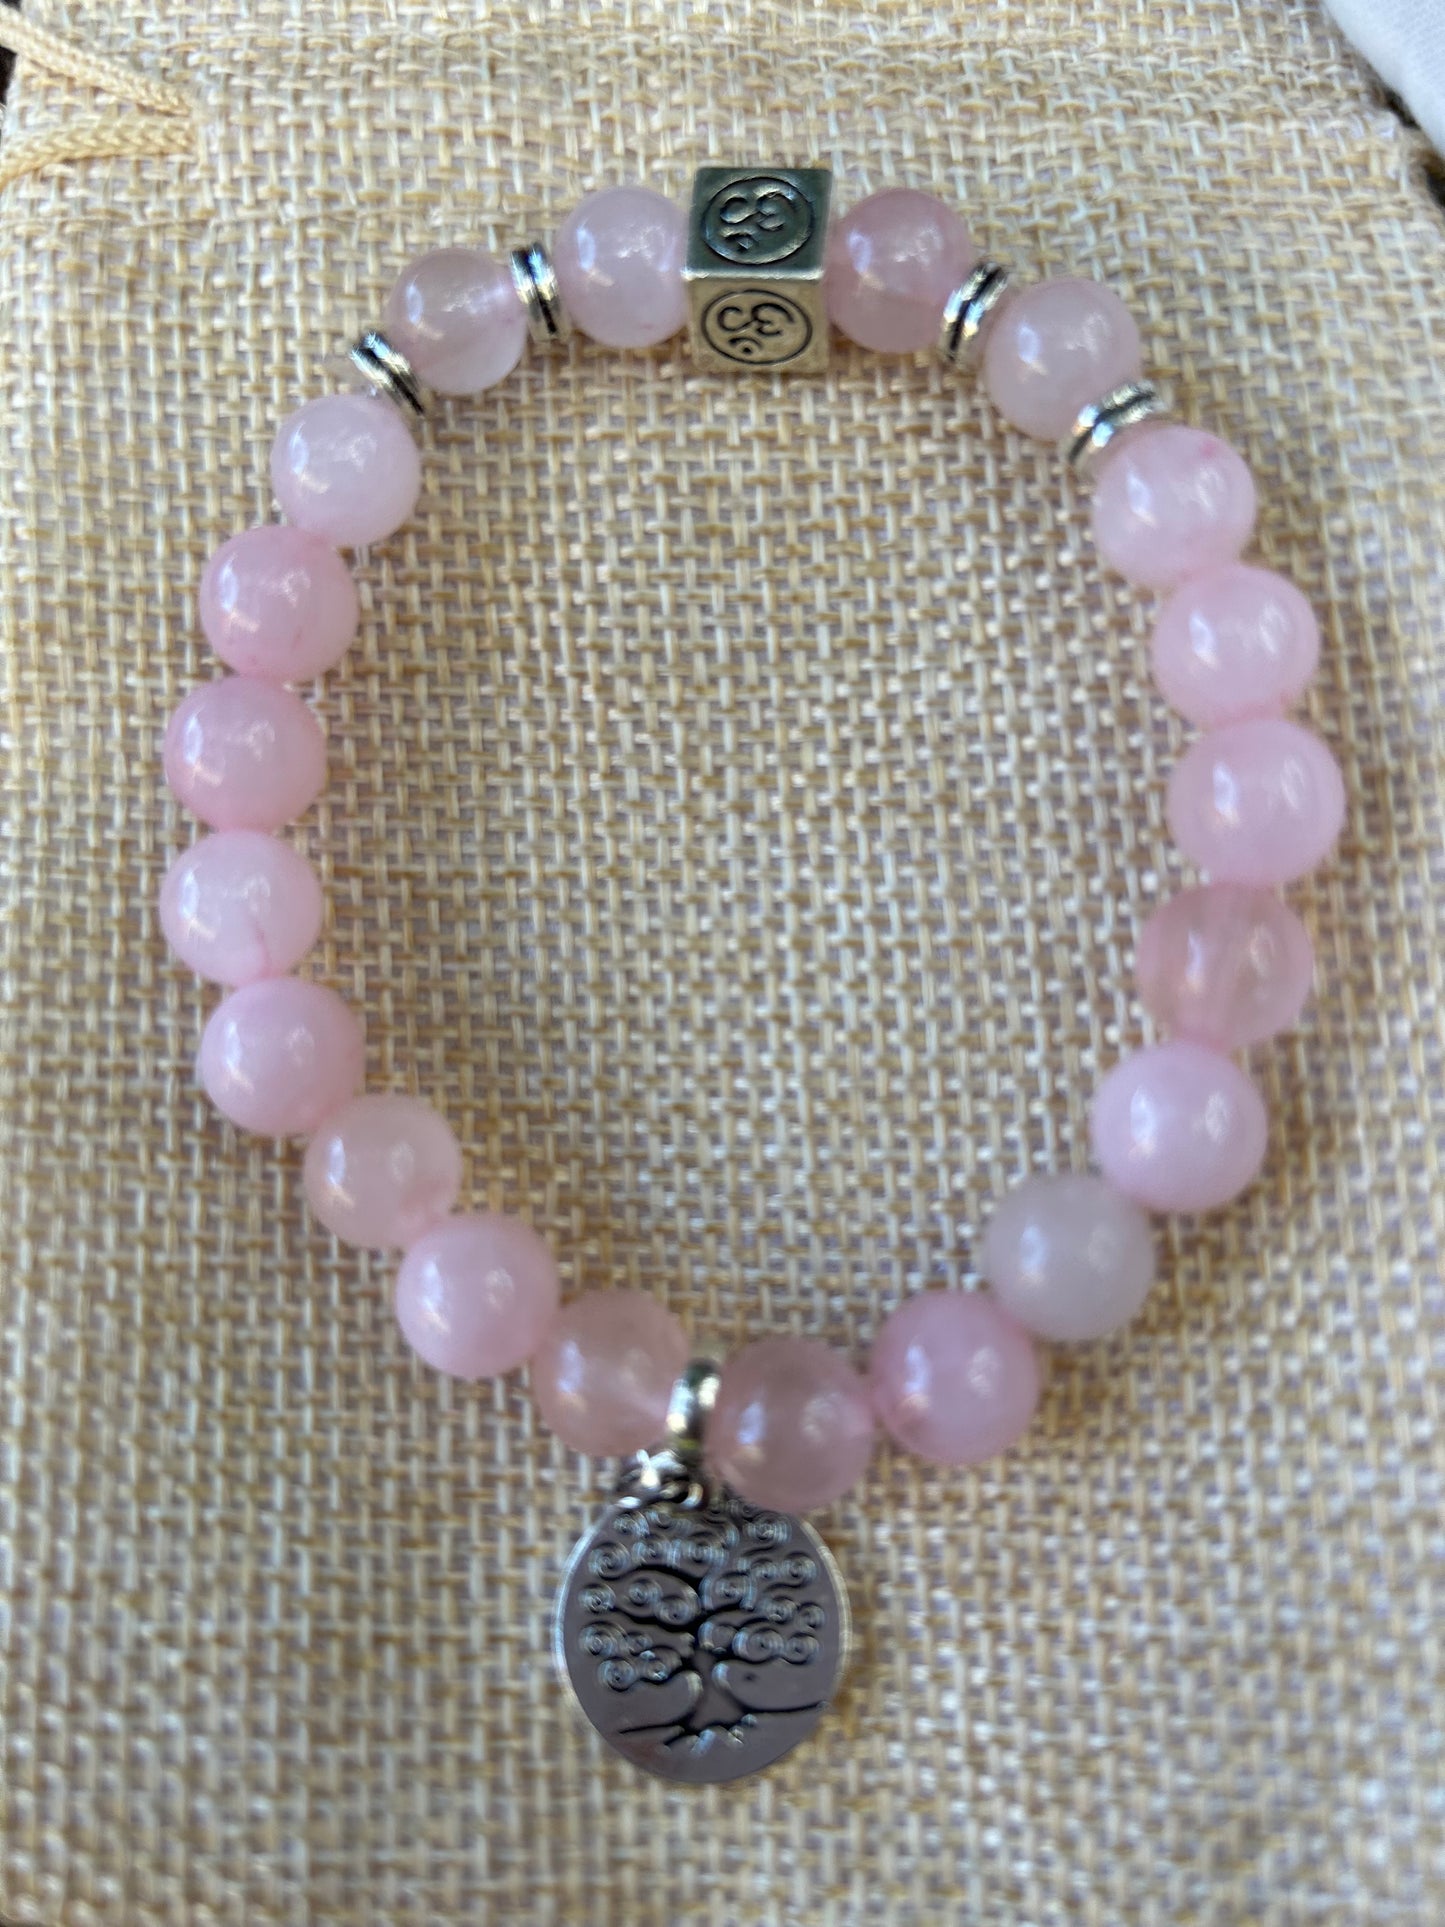 Rose quartz crystal polished bead bracelet with silver detail om symbol and tree of life charm